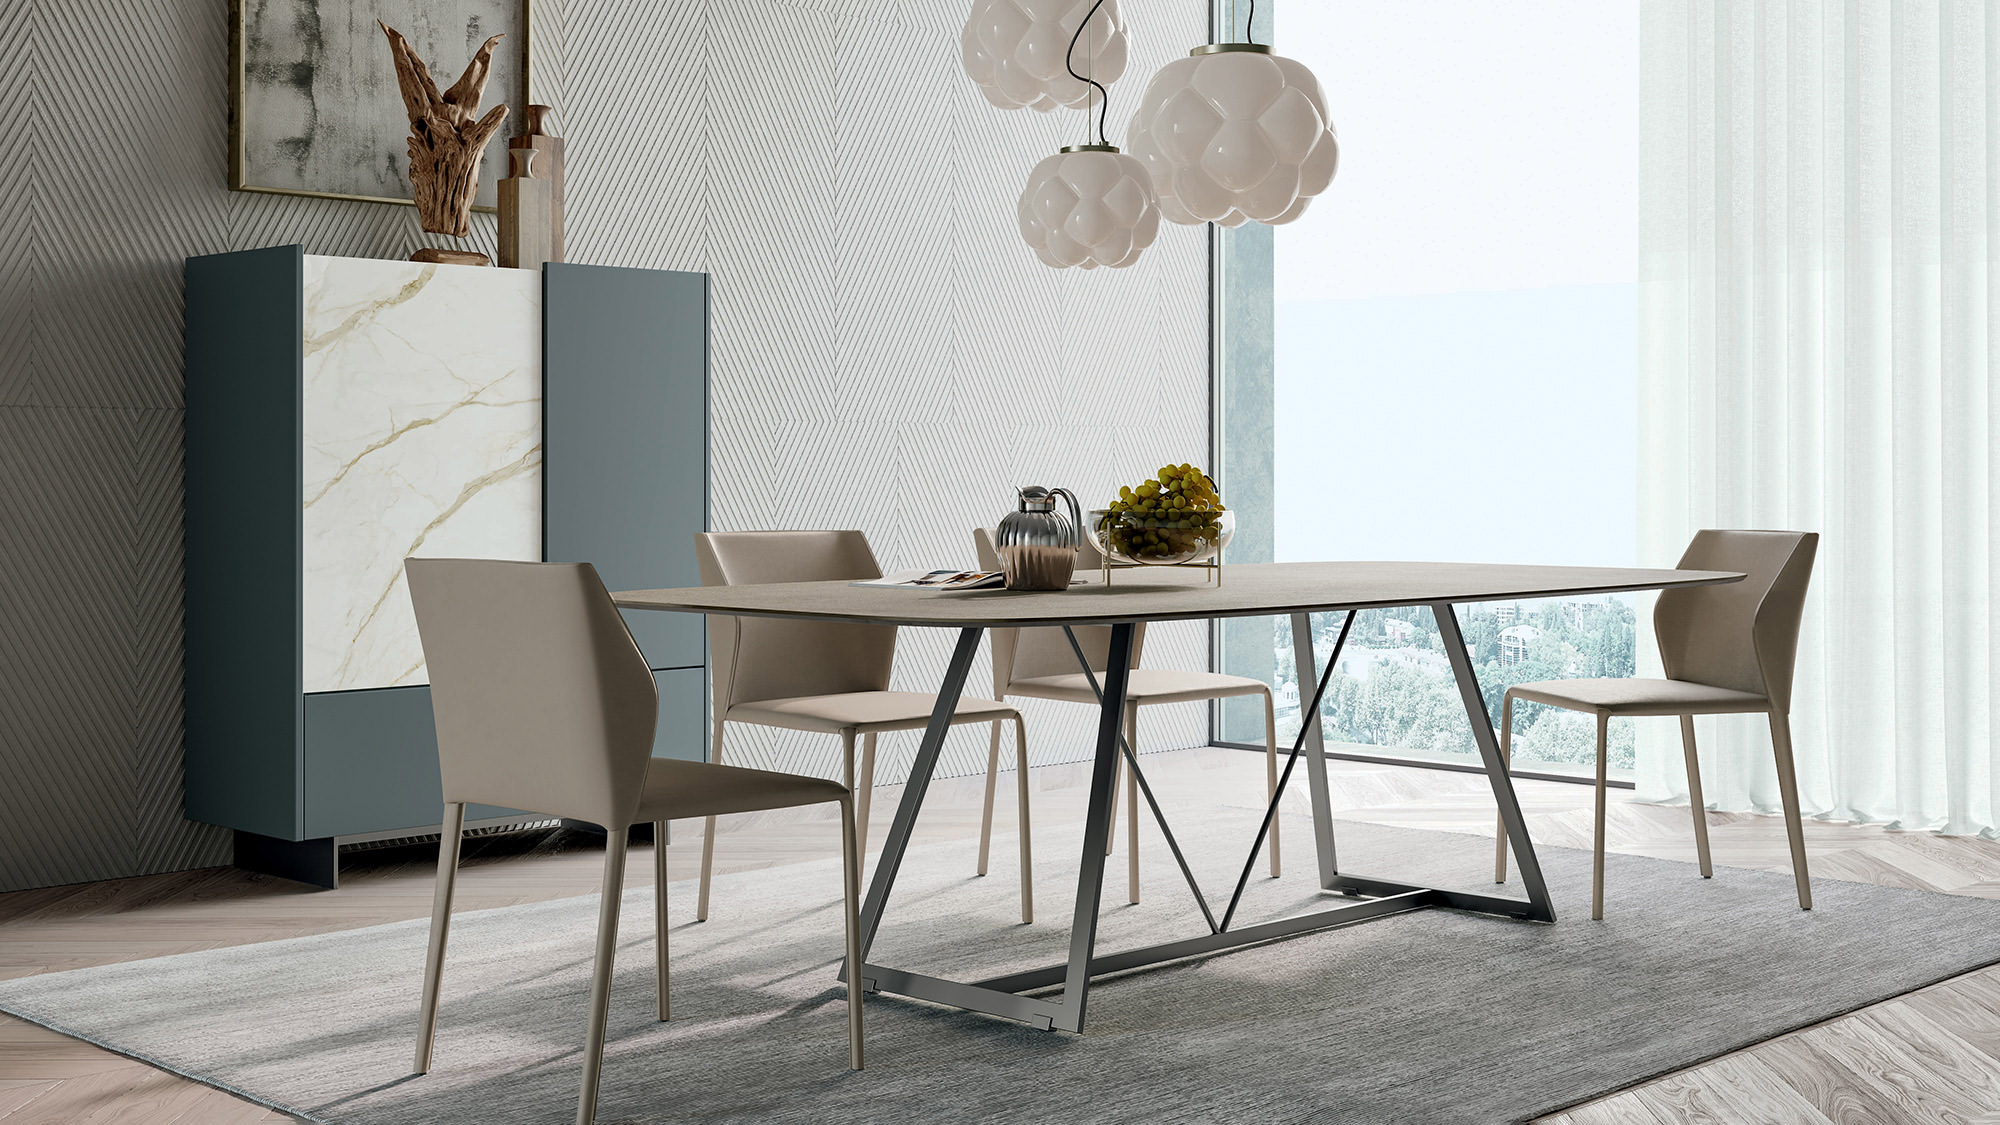 Radar table and Tailor chairs | Dallagnese